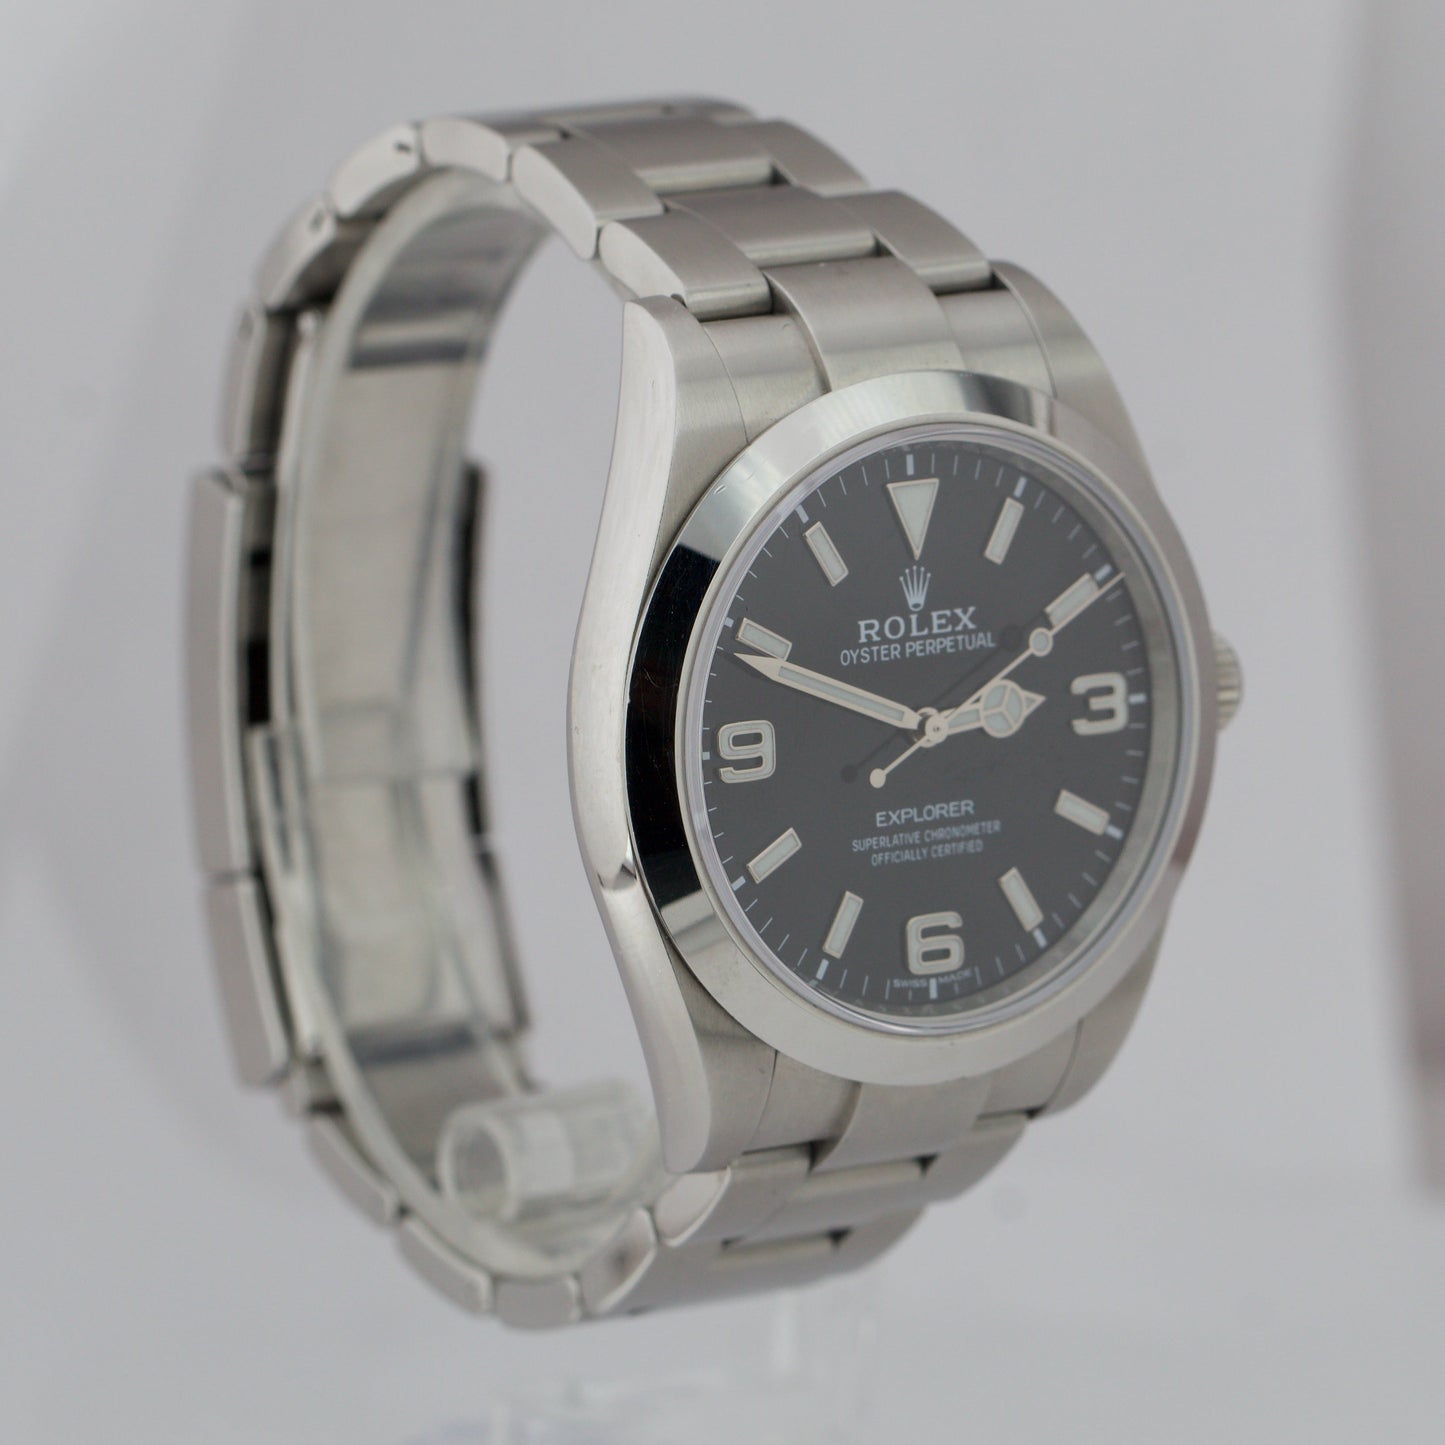 DISCONTINUED Rolex Explorer I Black FULL LUME MK2 Stainless 39mm 214270 Watch